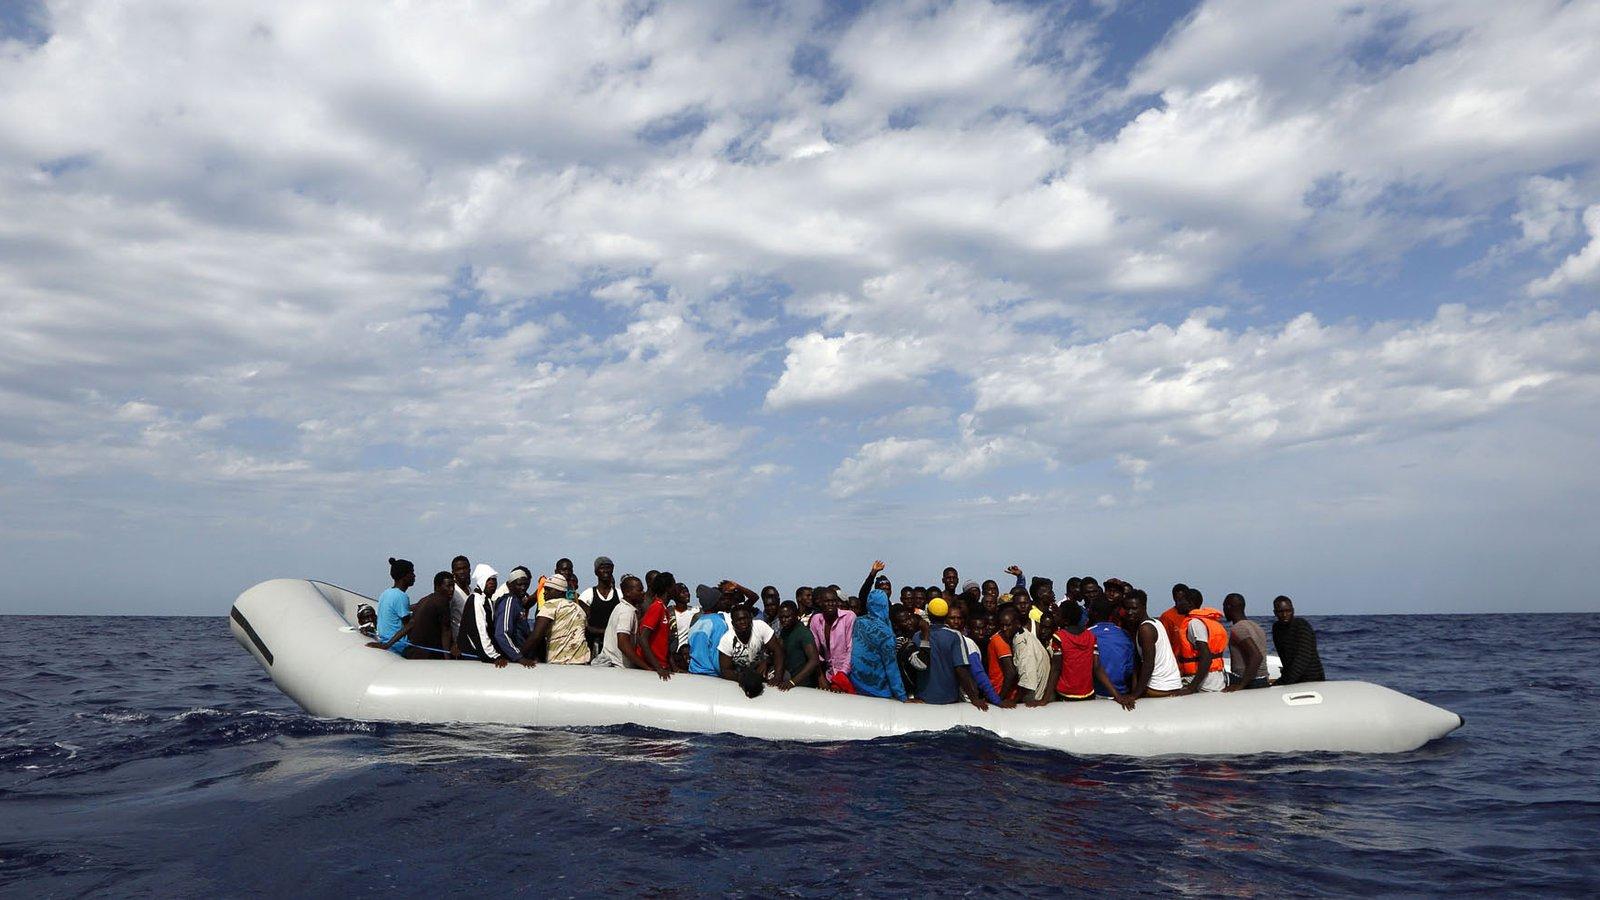 Pregnant mum, kids among 91 rescued off Spain coast